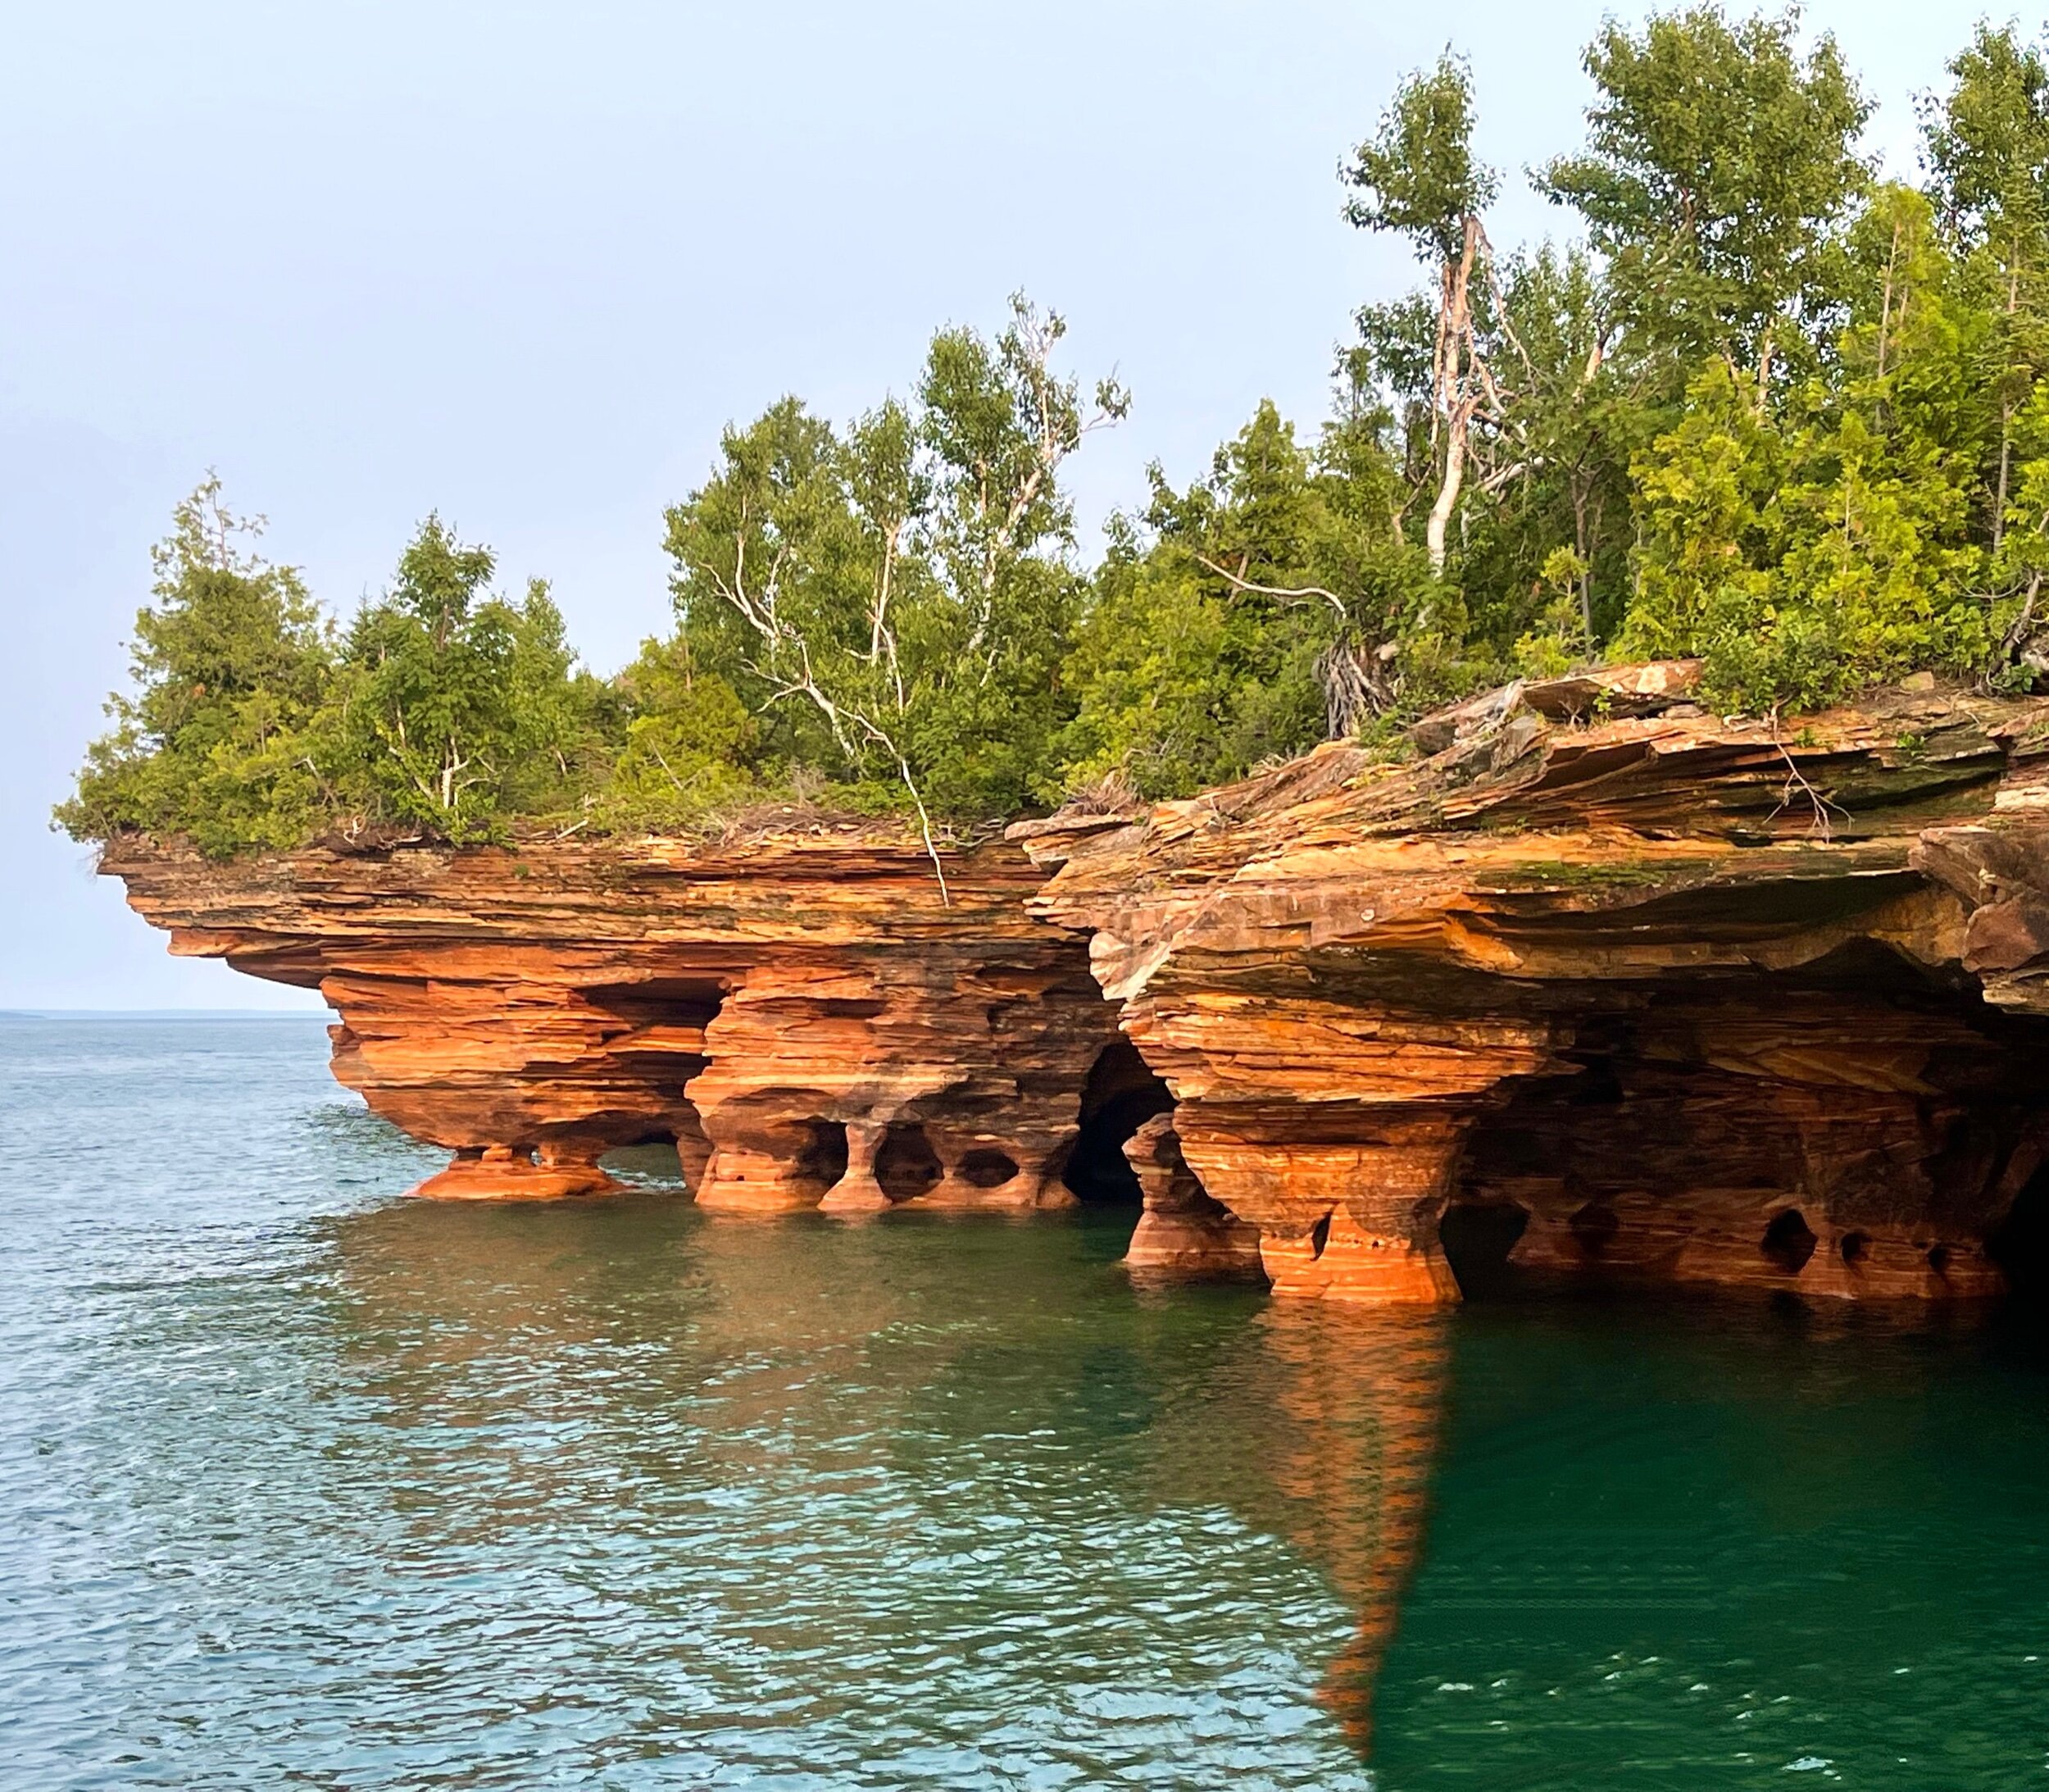   Apostle Islands National Lakeshore  includes a beautiful stretch of shoreline and 21 islands at the northernmost tip of Wisconsin on Lake Superior. This area is named after the 12 Disciples (or Apostles) in reference to the 12 largest islands here.